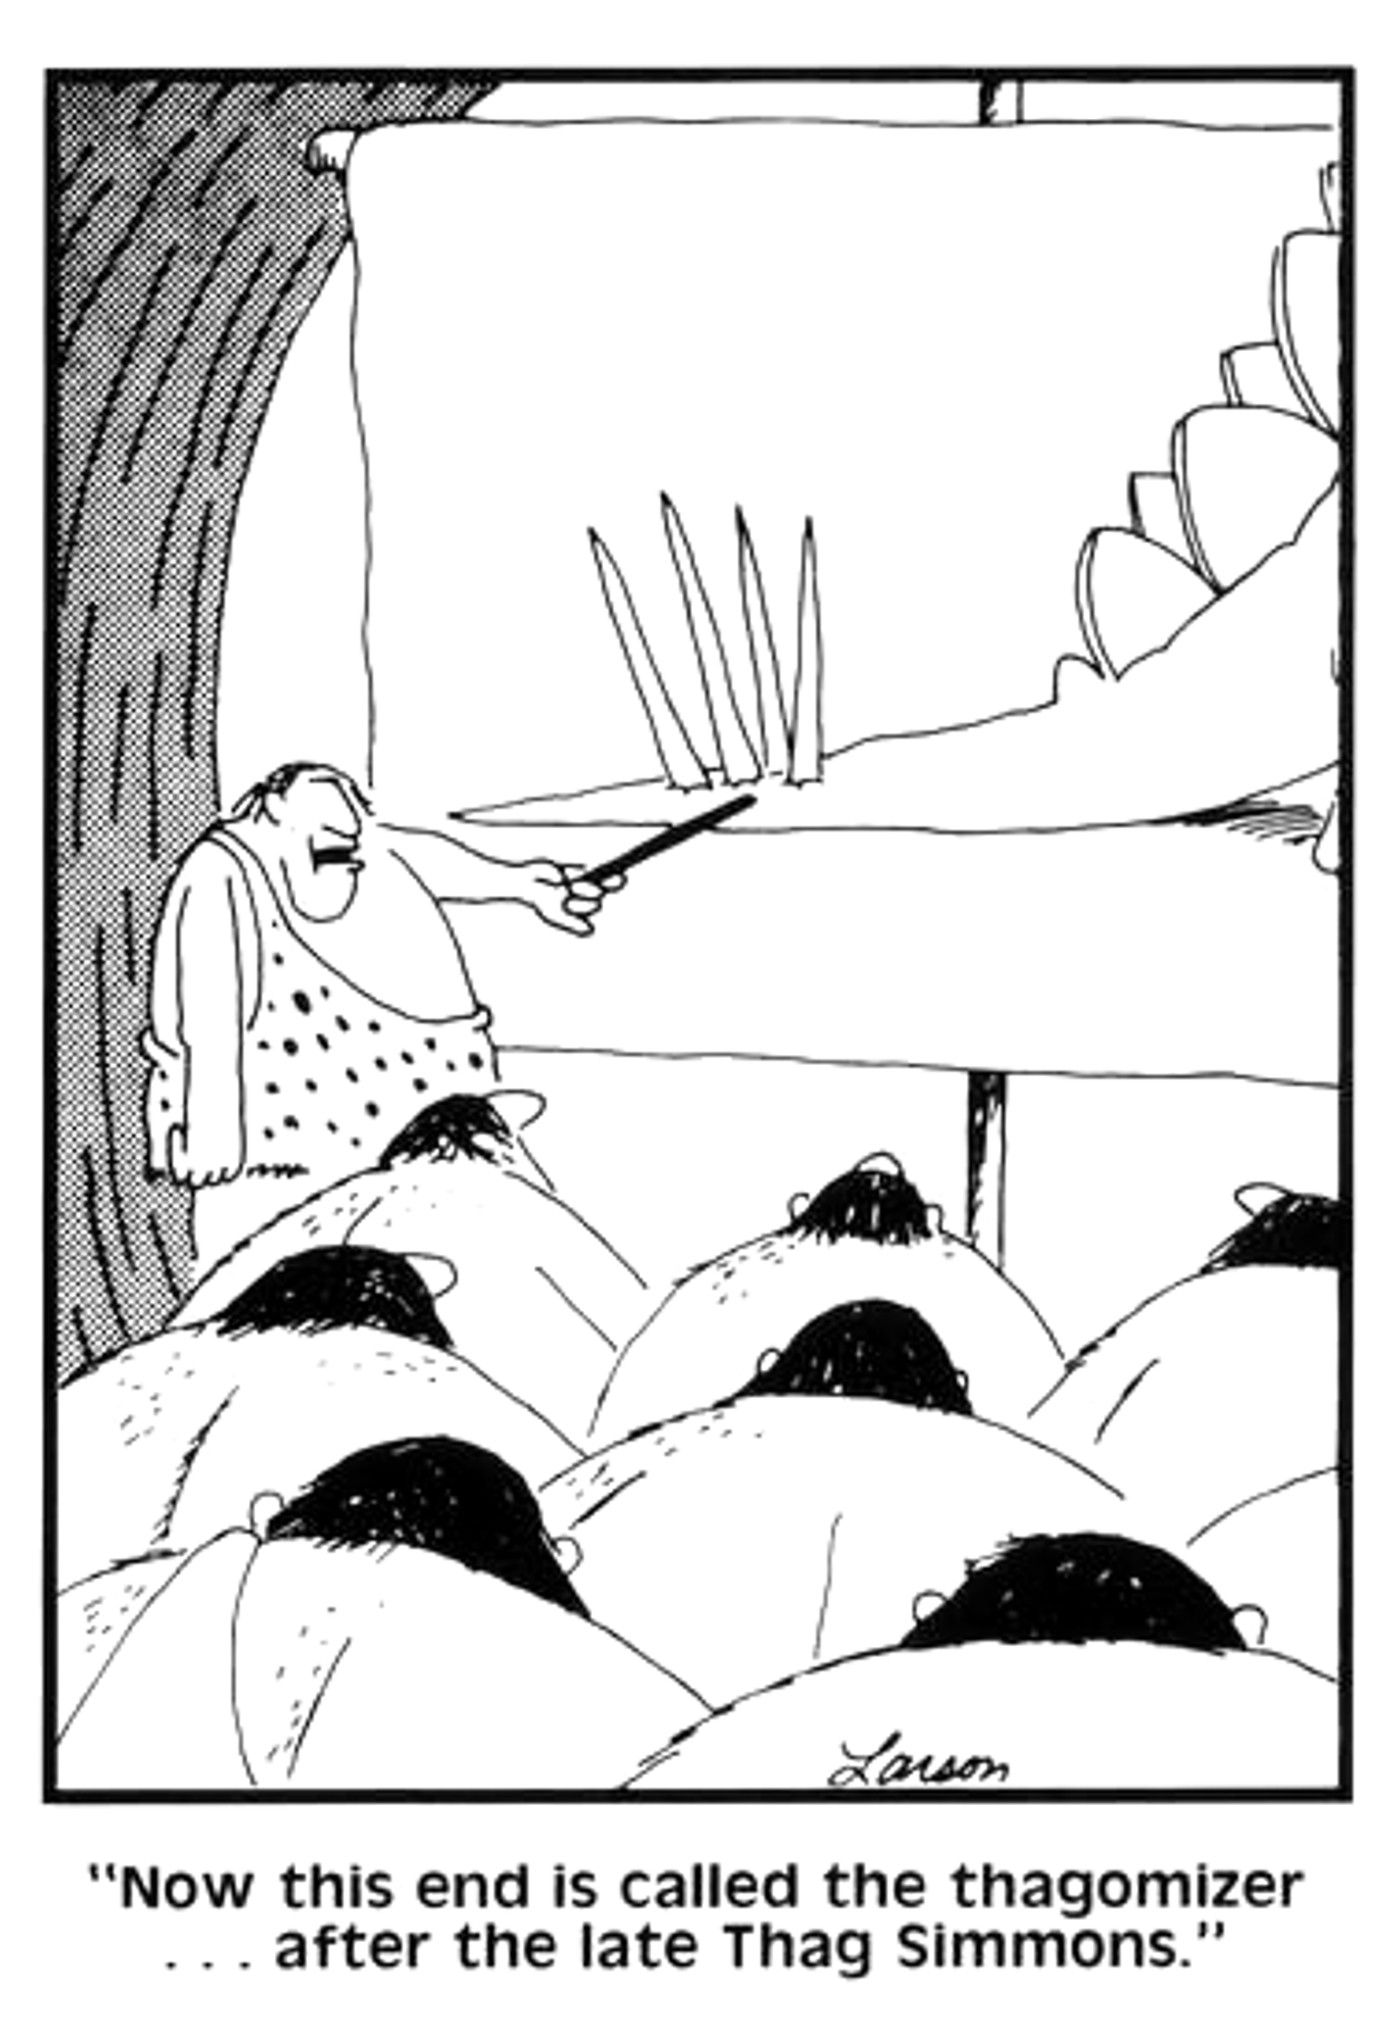 the far side comic that named the stegosaurus' tail spikes the thagomizer